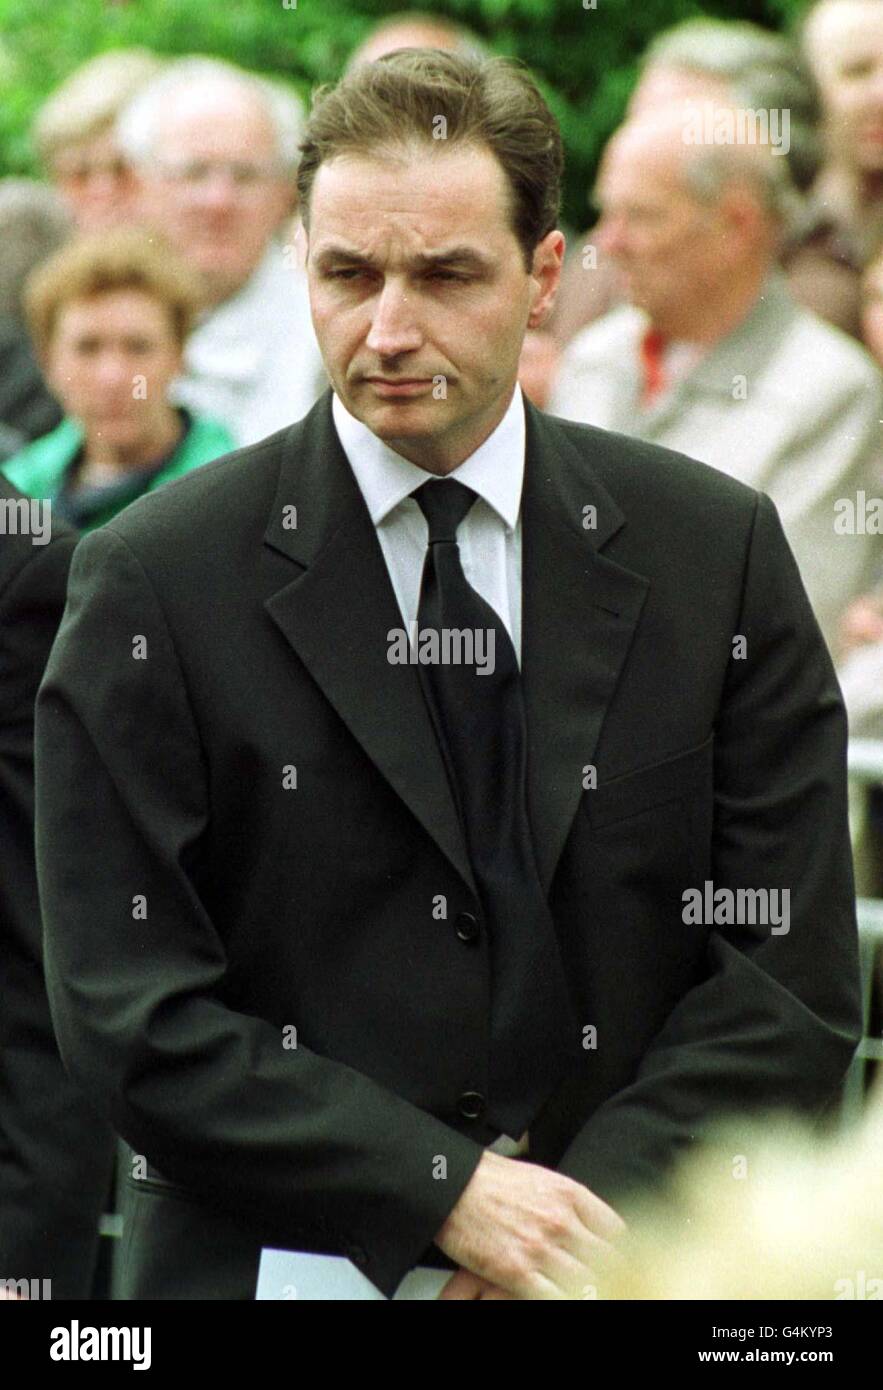 Dr Alan Farthing attends the funeral of his former fiance Jill Dando, at Clarence Park, Baptist Church, Weston-Super-Mare. The TV presenter was murdered on the doorstep of her Fulham home, 26/4/99. Stock Photo